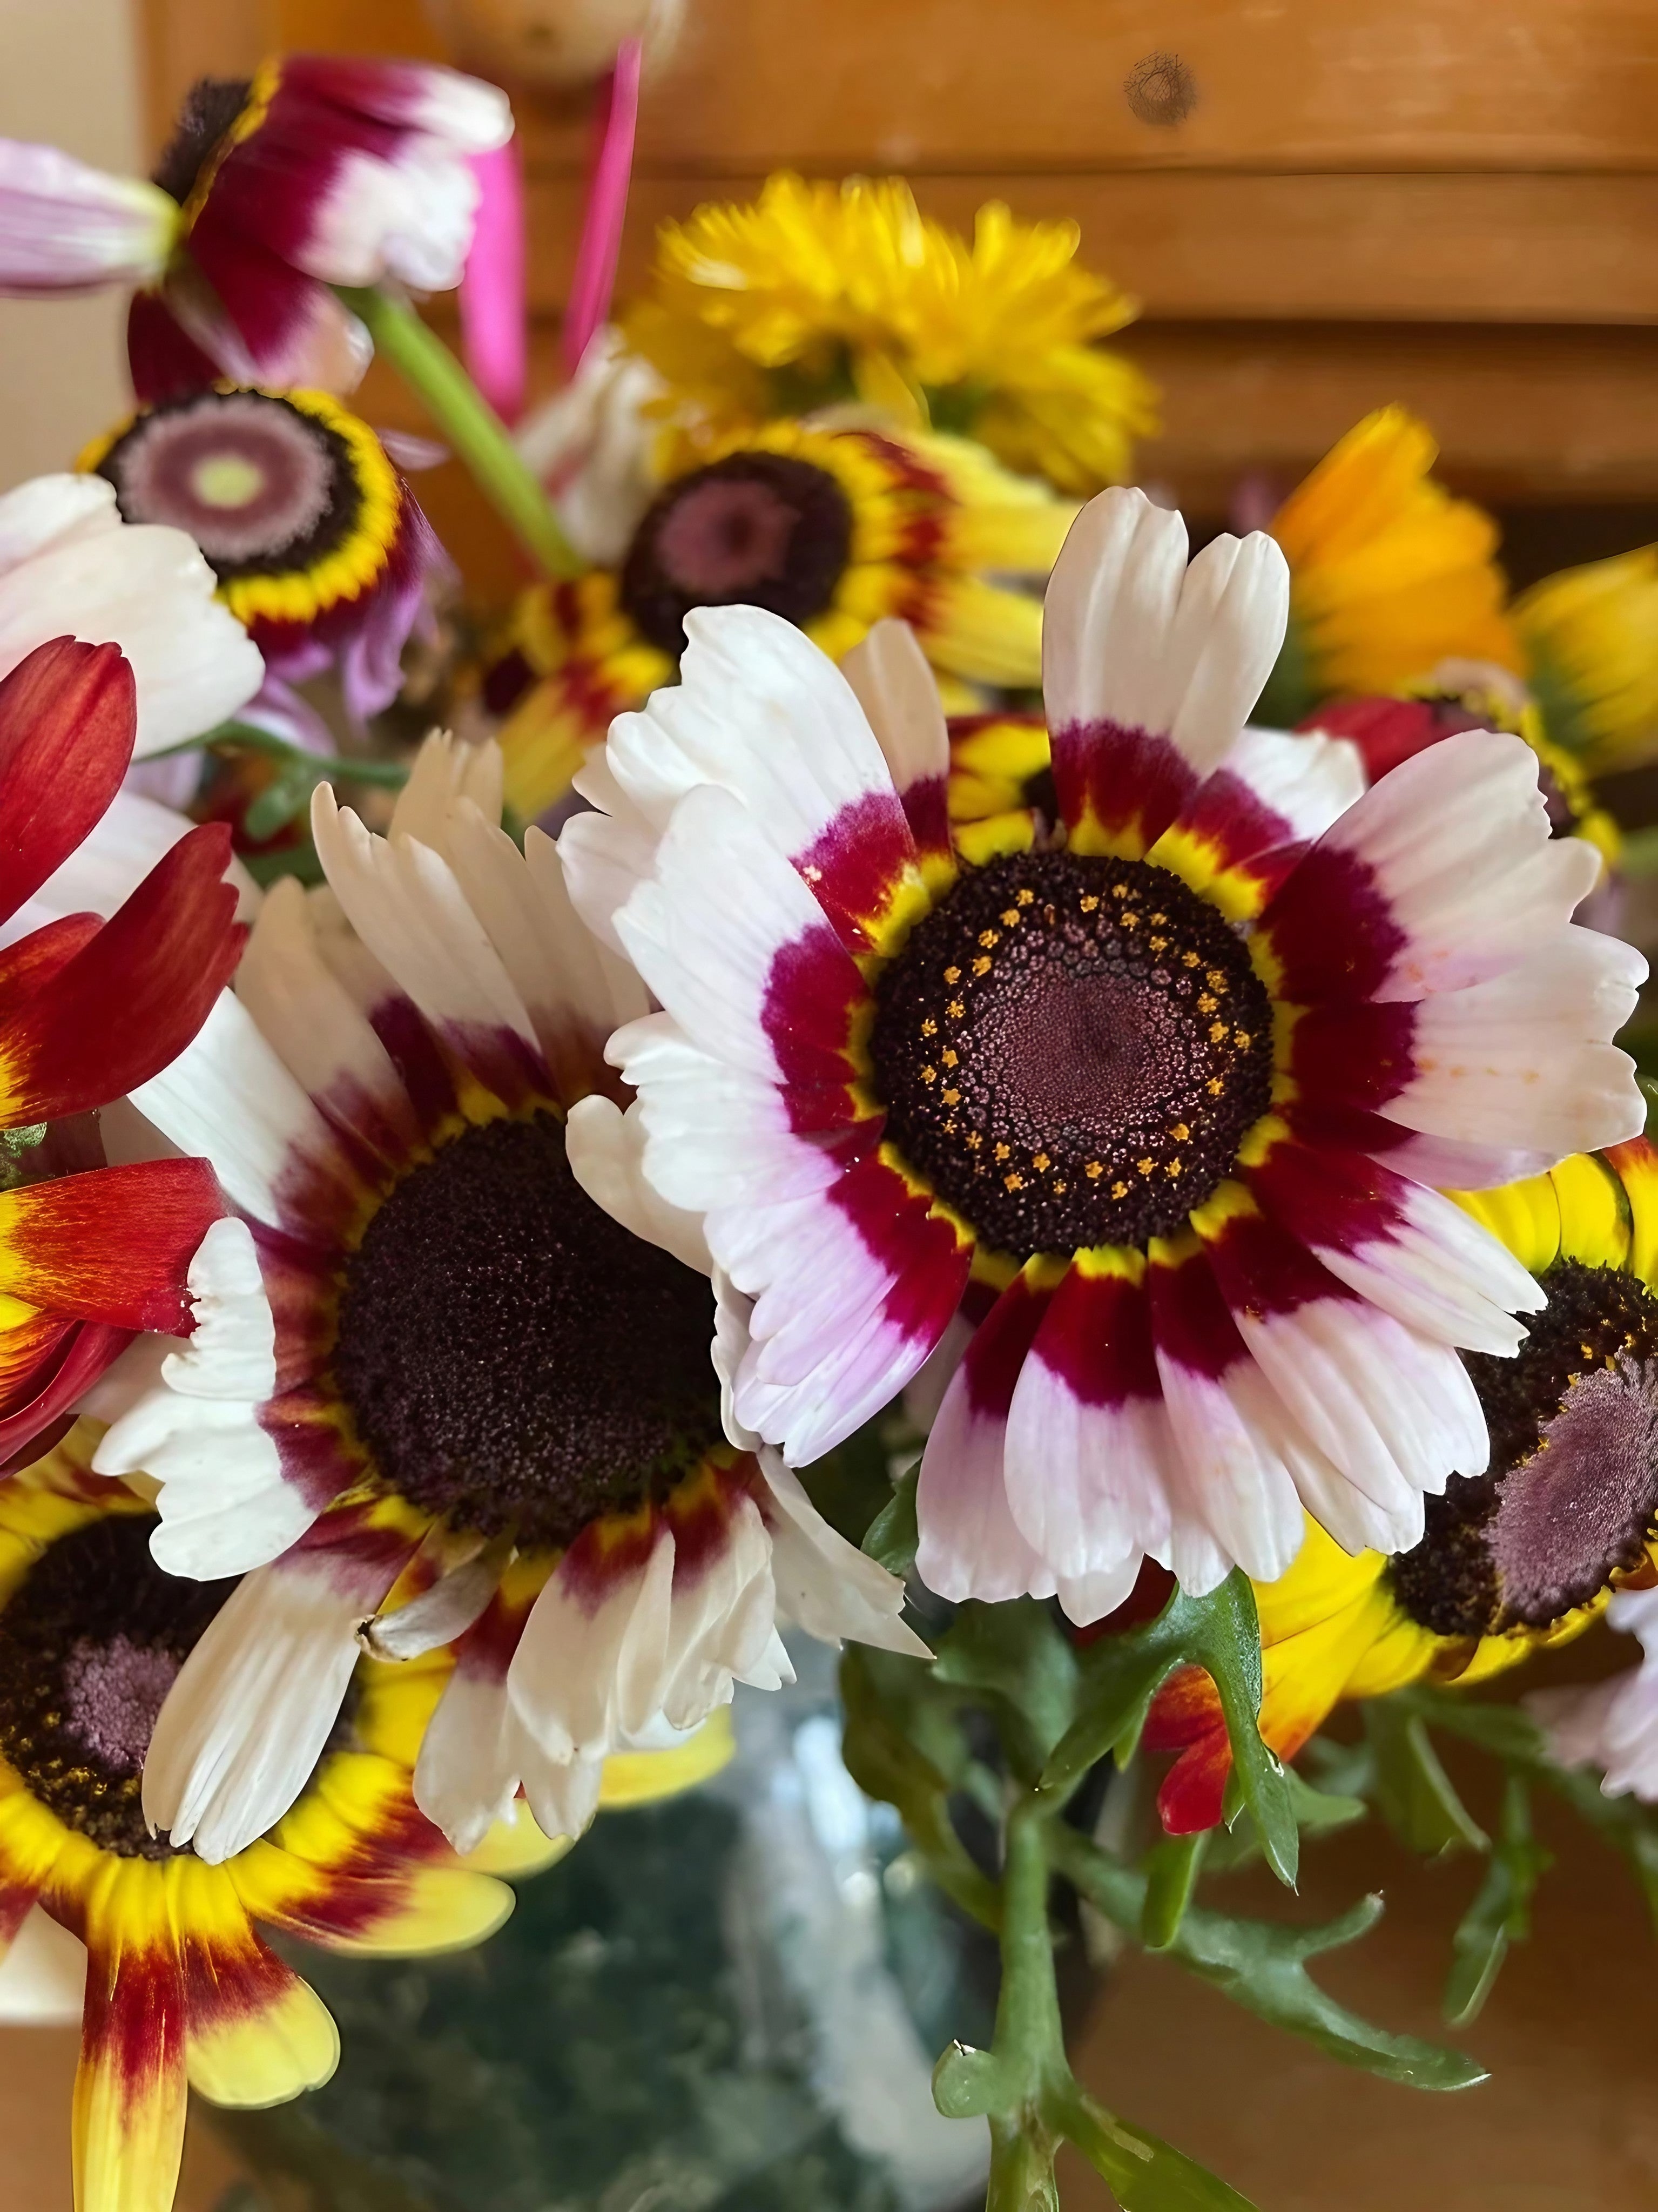 An arrangement of Chrysanthemum Painted Daisies in a vase on a table